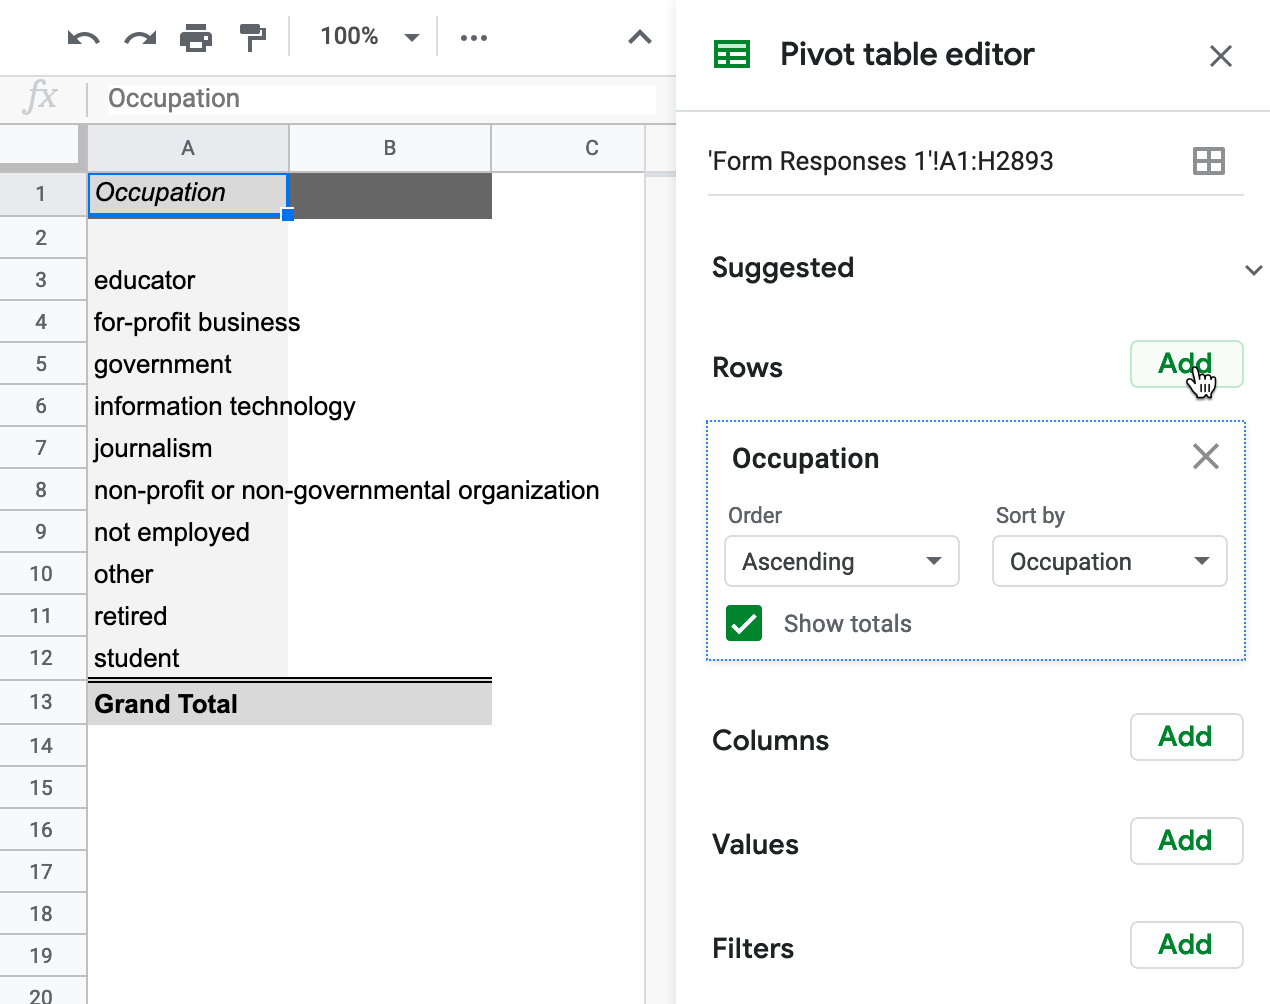 In the Pivot table editor, click the Rows Add button and select Occupation.